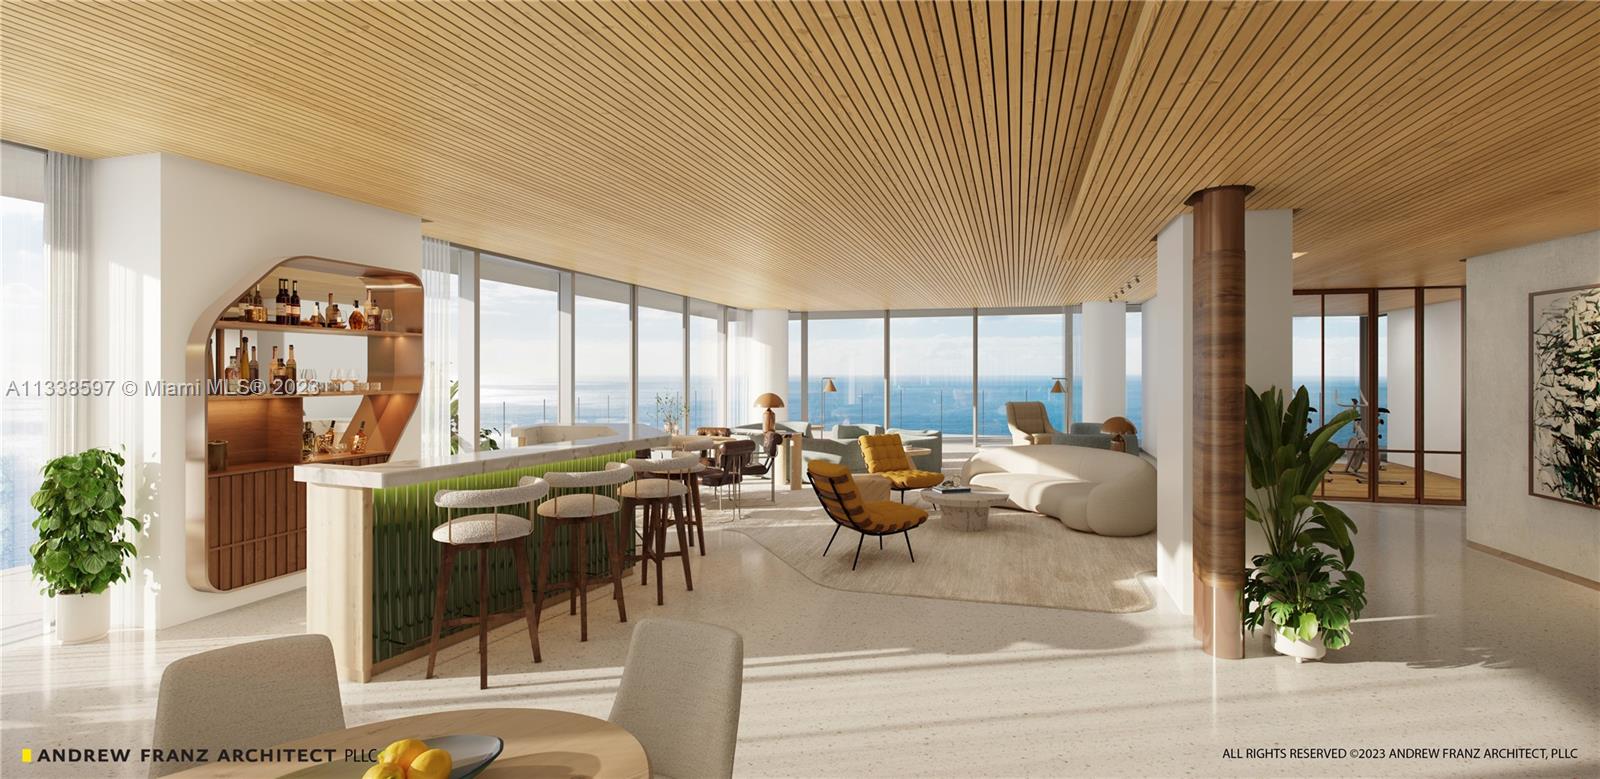 Rare opportunity in Bal Harbour’s most coveted building to customize a one-of-a-kind direct oceanfront residence in the sky. Expansive corner unit complete with APPROVED plans and permits for a spacious 7,442sqft space that feels like a single-family home, featuring 4-bedrooms with private gym, office, entertaining bar, plus 2 additional staff rooms. Floor to ceiling walls of glass open up to an incredible wraparound terrace showcasing over 2,300sqft of outdoor space overlooking unobstructed views of the ocean and bay. The possibilities are boundless, with Oceana residents gaining access to unrivaled amenities and community including concierge beach service, resort-style pool, spa, tennis, restaurant, 24/7 concierge and security – all within reach of the best dining, shopping, top schools.